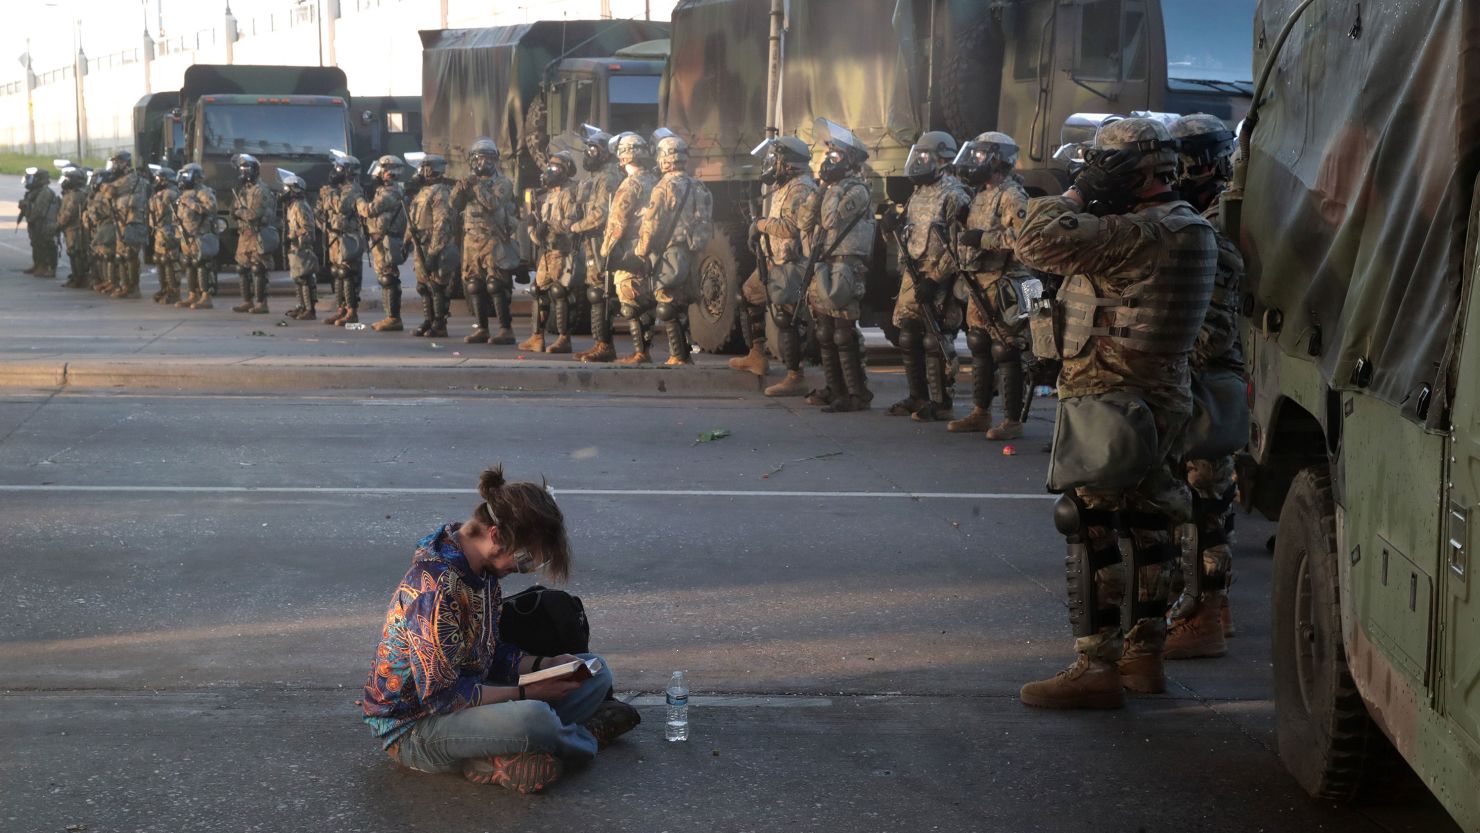 A women reads a bible in front of a line of National Guardsmen as the 8pm curfew approaches during protests sparked by the death of George Floyd while in police custody on May 29, 2020 in Minneapolis, Minnesota. Earlier today, former Minneapolis police officer Derek Chauvin was taken into custody for Floyd's death. Chauvin has been accused of kneeling on Floyd's neck as he pleaded with him about not being able to breathe. Floyd was pronounced dead a short while later. Chauvin and 3 other officers, who were involved in the arrest, were fired from the police department after a video of the arrest was circulated.